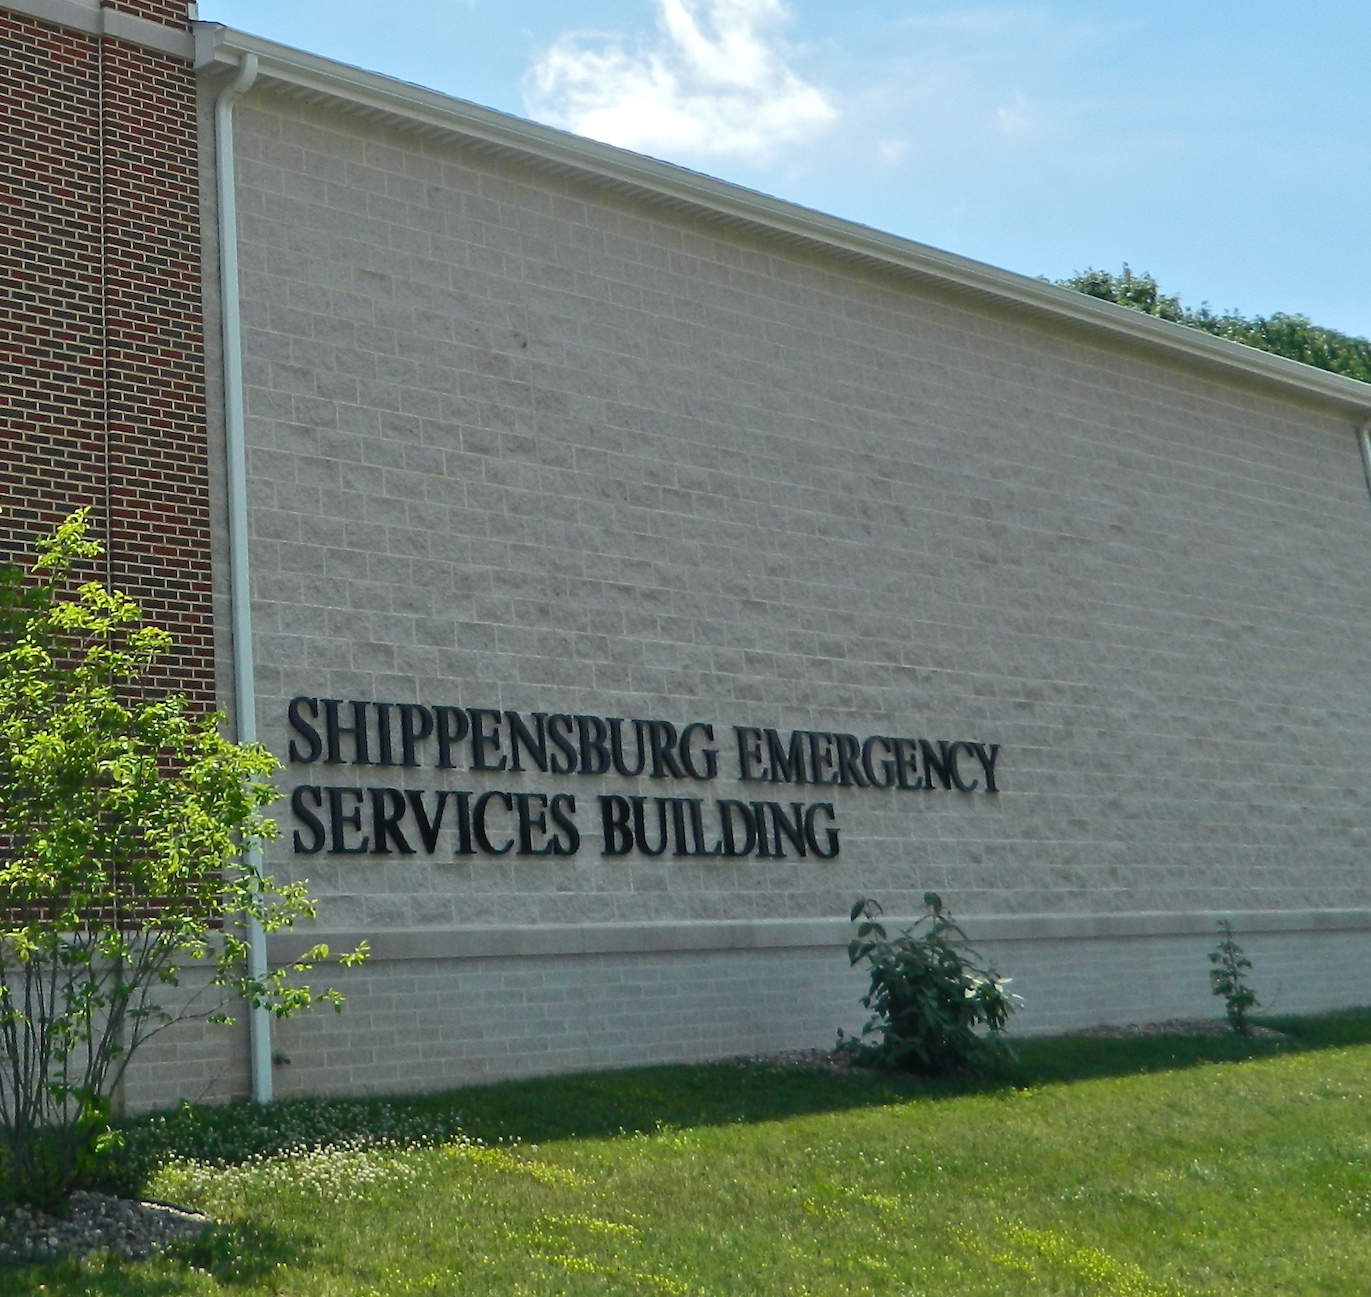 Shippensburg Emergency Services building made of recycled concrete block